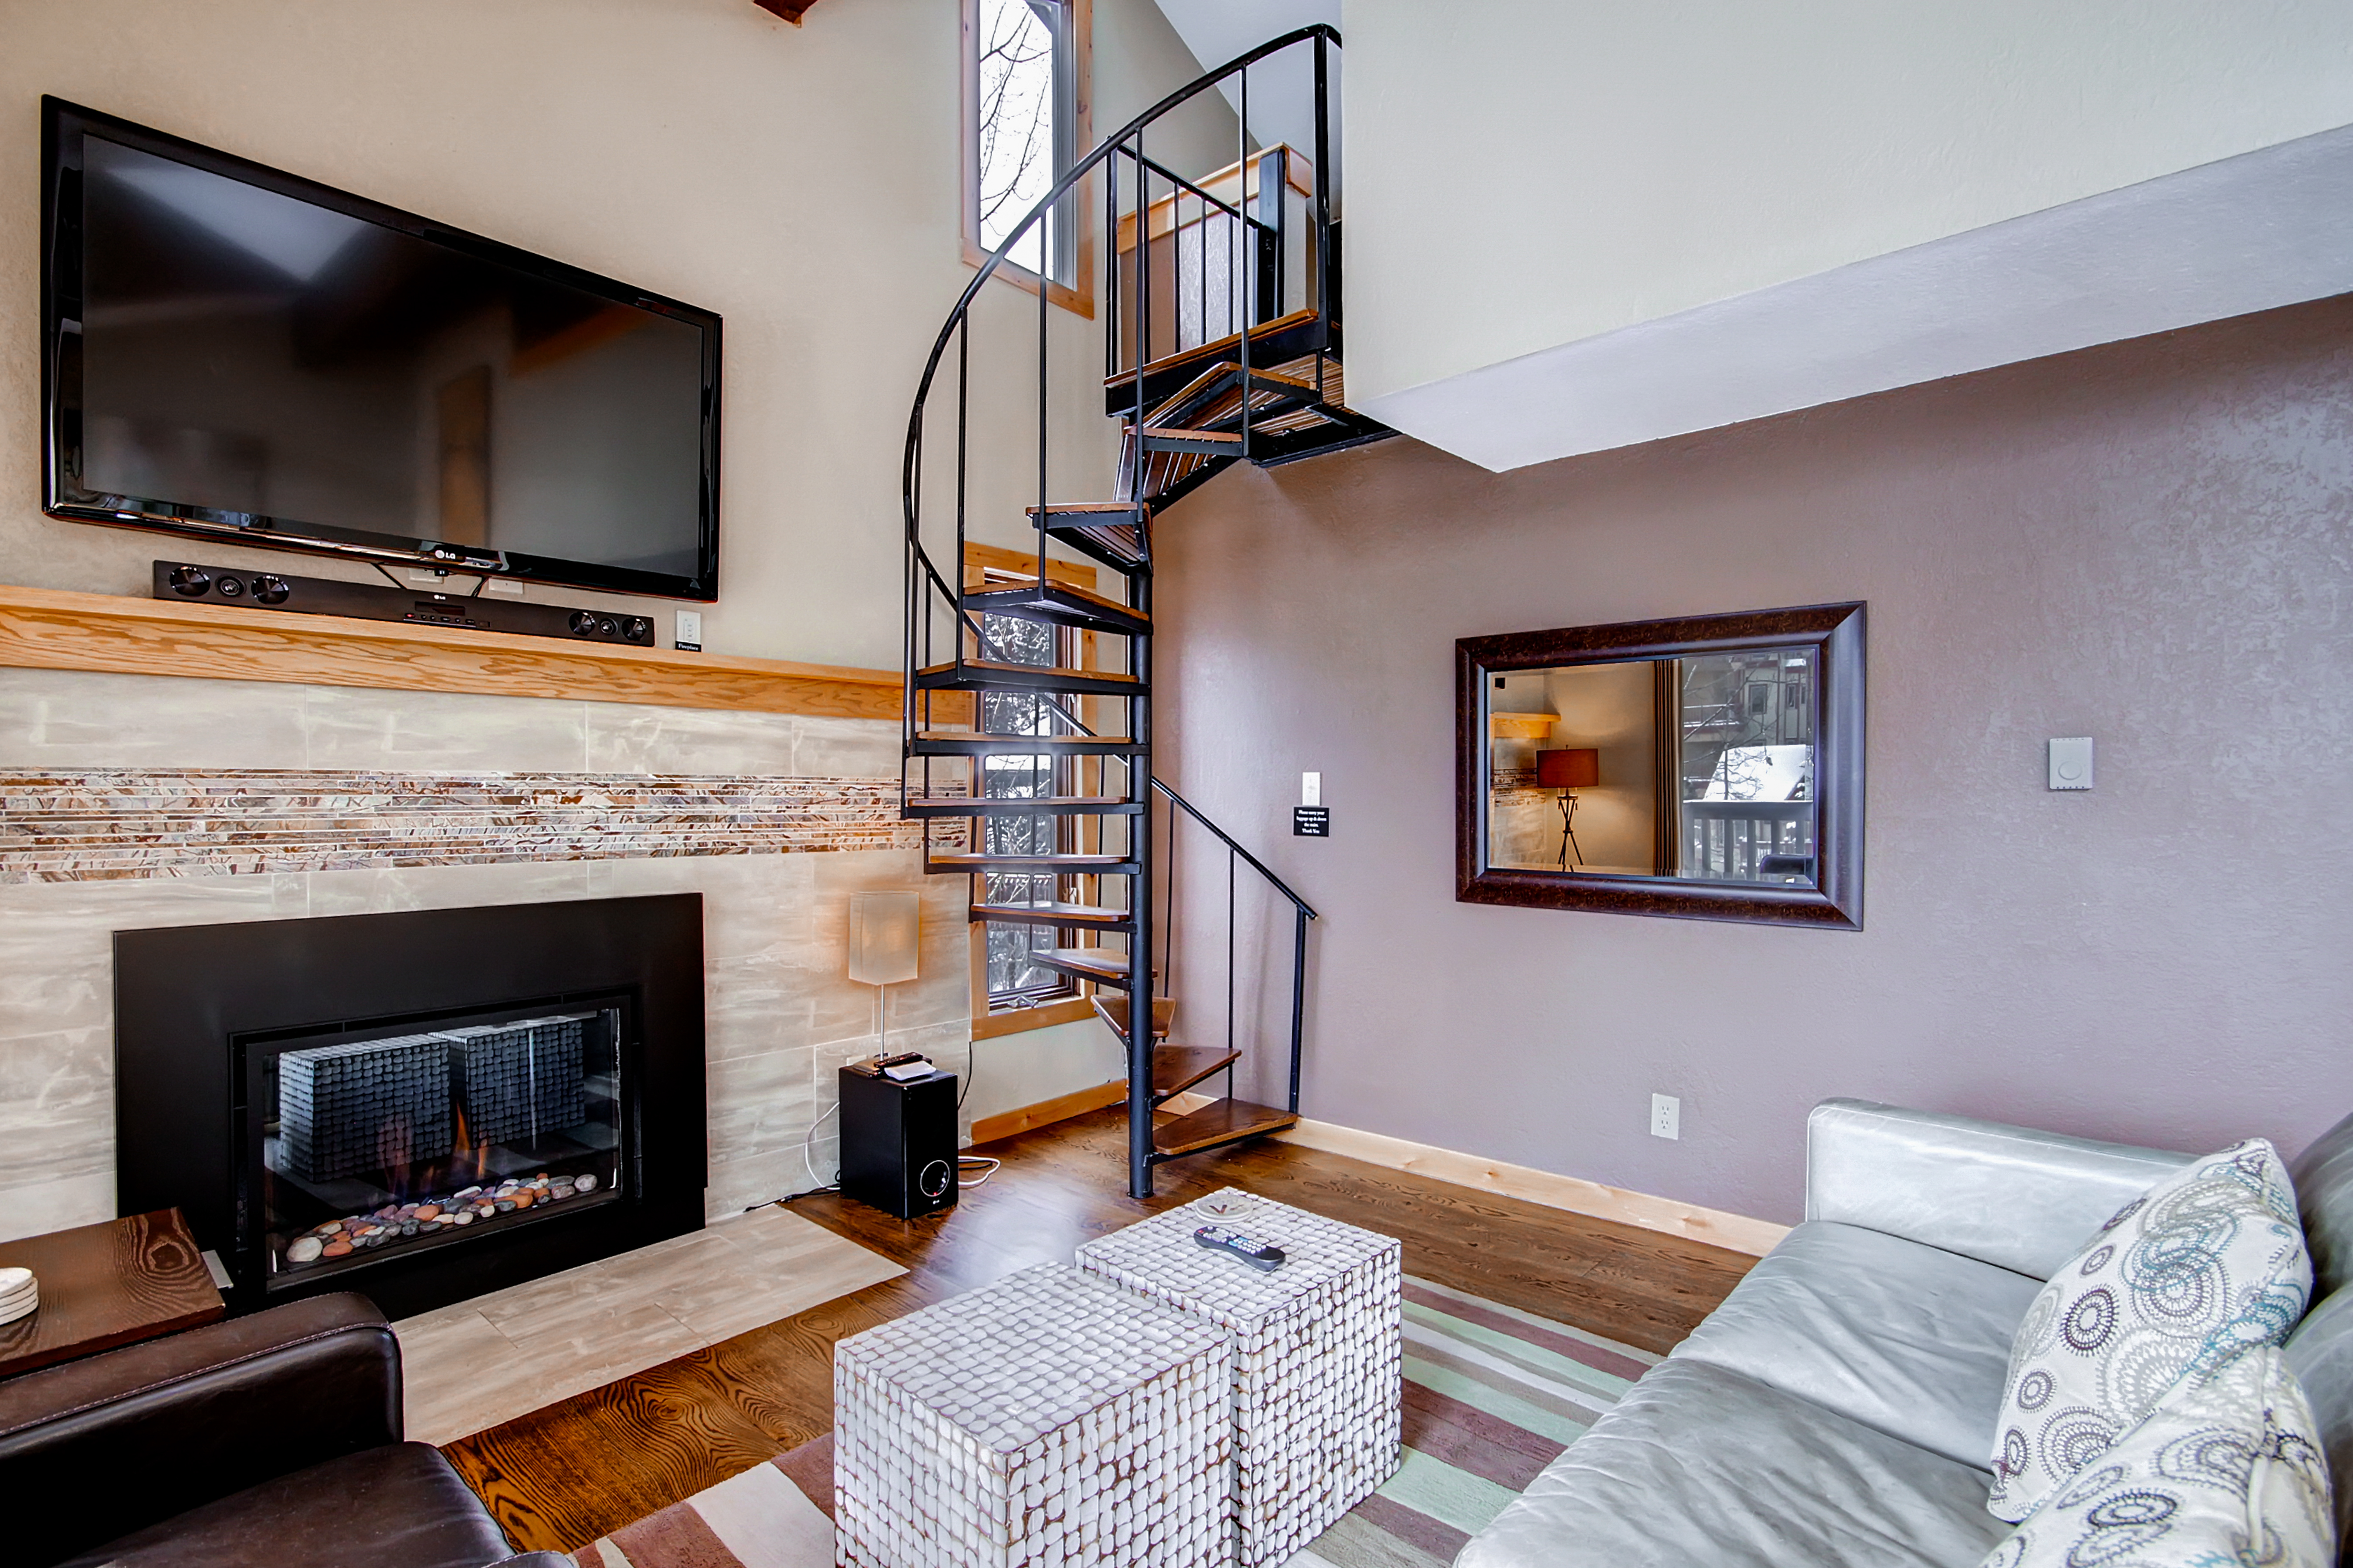 Spiral staircase leads up to the loft - 4 O’Clock Lodge A16 Breckenridge Vacation Rental